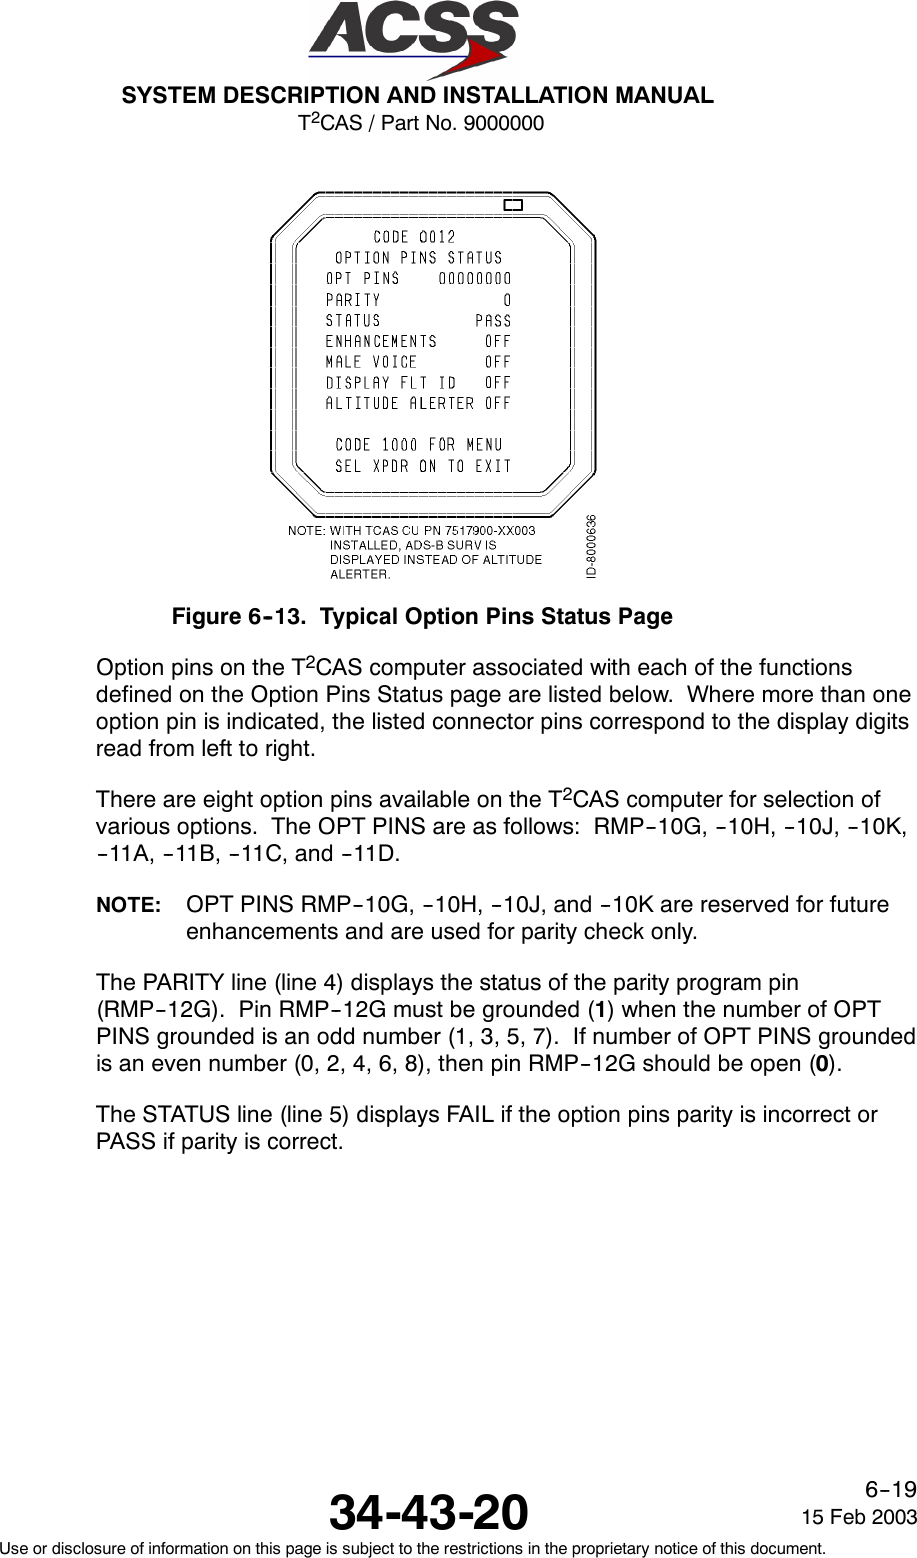 T2CAS / Part No. 9000000SYSTEM DESCRIPTION AND INSTALLATION MANUAL34-43-20 15 Feb 2003Use or disclosure of information on this page is subject to the restrictions in the proprietary notice of this document.6--19Figure 6--13. Typical Option Pins Status PageOption pins on the T2CAS computer associated with each of the functionsdefined on the Option Pins Status page are listed below. Where more than oneoption pin is indicated, the listed connector pins correspond to the display digitsread from left to right.There are eight option pins available on the T2CAS computer for selection ofvarious options. The OPT PINS are as follows: RMP--10G, --10H, --10J, --10K,-- 11 A , -- 1 1 B , -- 11 C , a n d -- 11 D .NOTE: OPT PINS RMP--10G, --10H, --10J, and --10K are reserved for futureenhancements and are used for parity check only.The PARITY line (line 4) displays the status of the parity program pin(RMP--12G). Pin RMP--12G must be grounded (1) when the number of OPTPINS grounded is an odd number (1, 3, 5, 7). If number of OPT PINS groundedis an even number (0, 2, 4, 6, 8), then pin RMP--12G should be open (0).The STATUS line (line 5) displays FAIL if the option pins parity is incorrect orPASS if parity is correct.